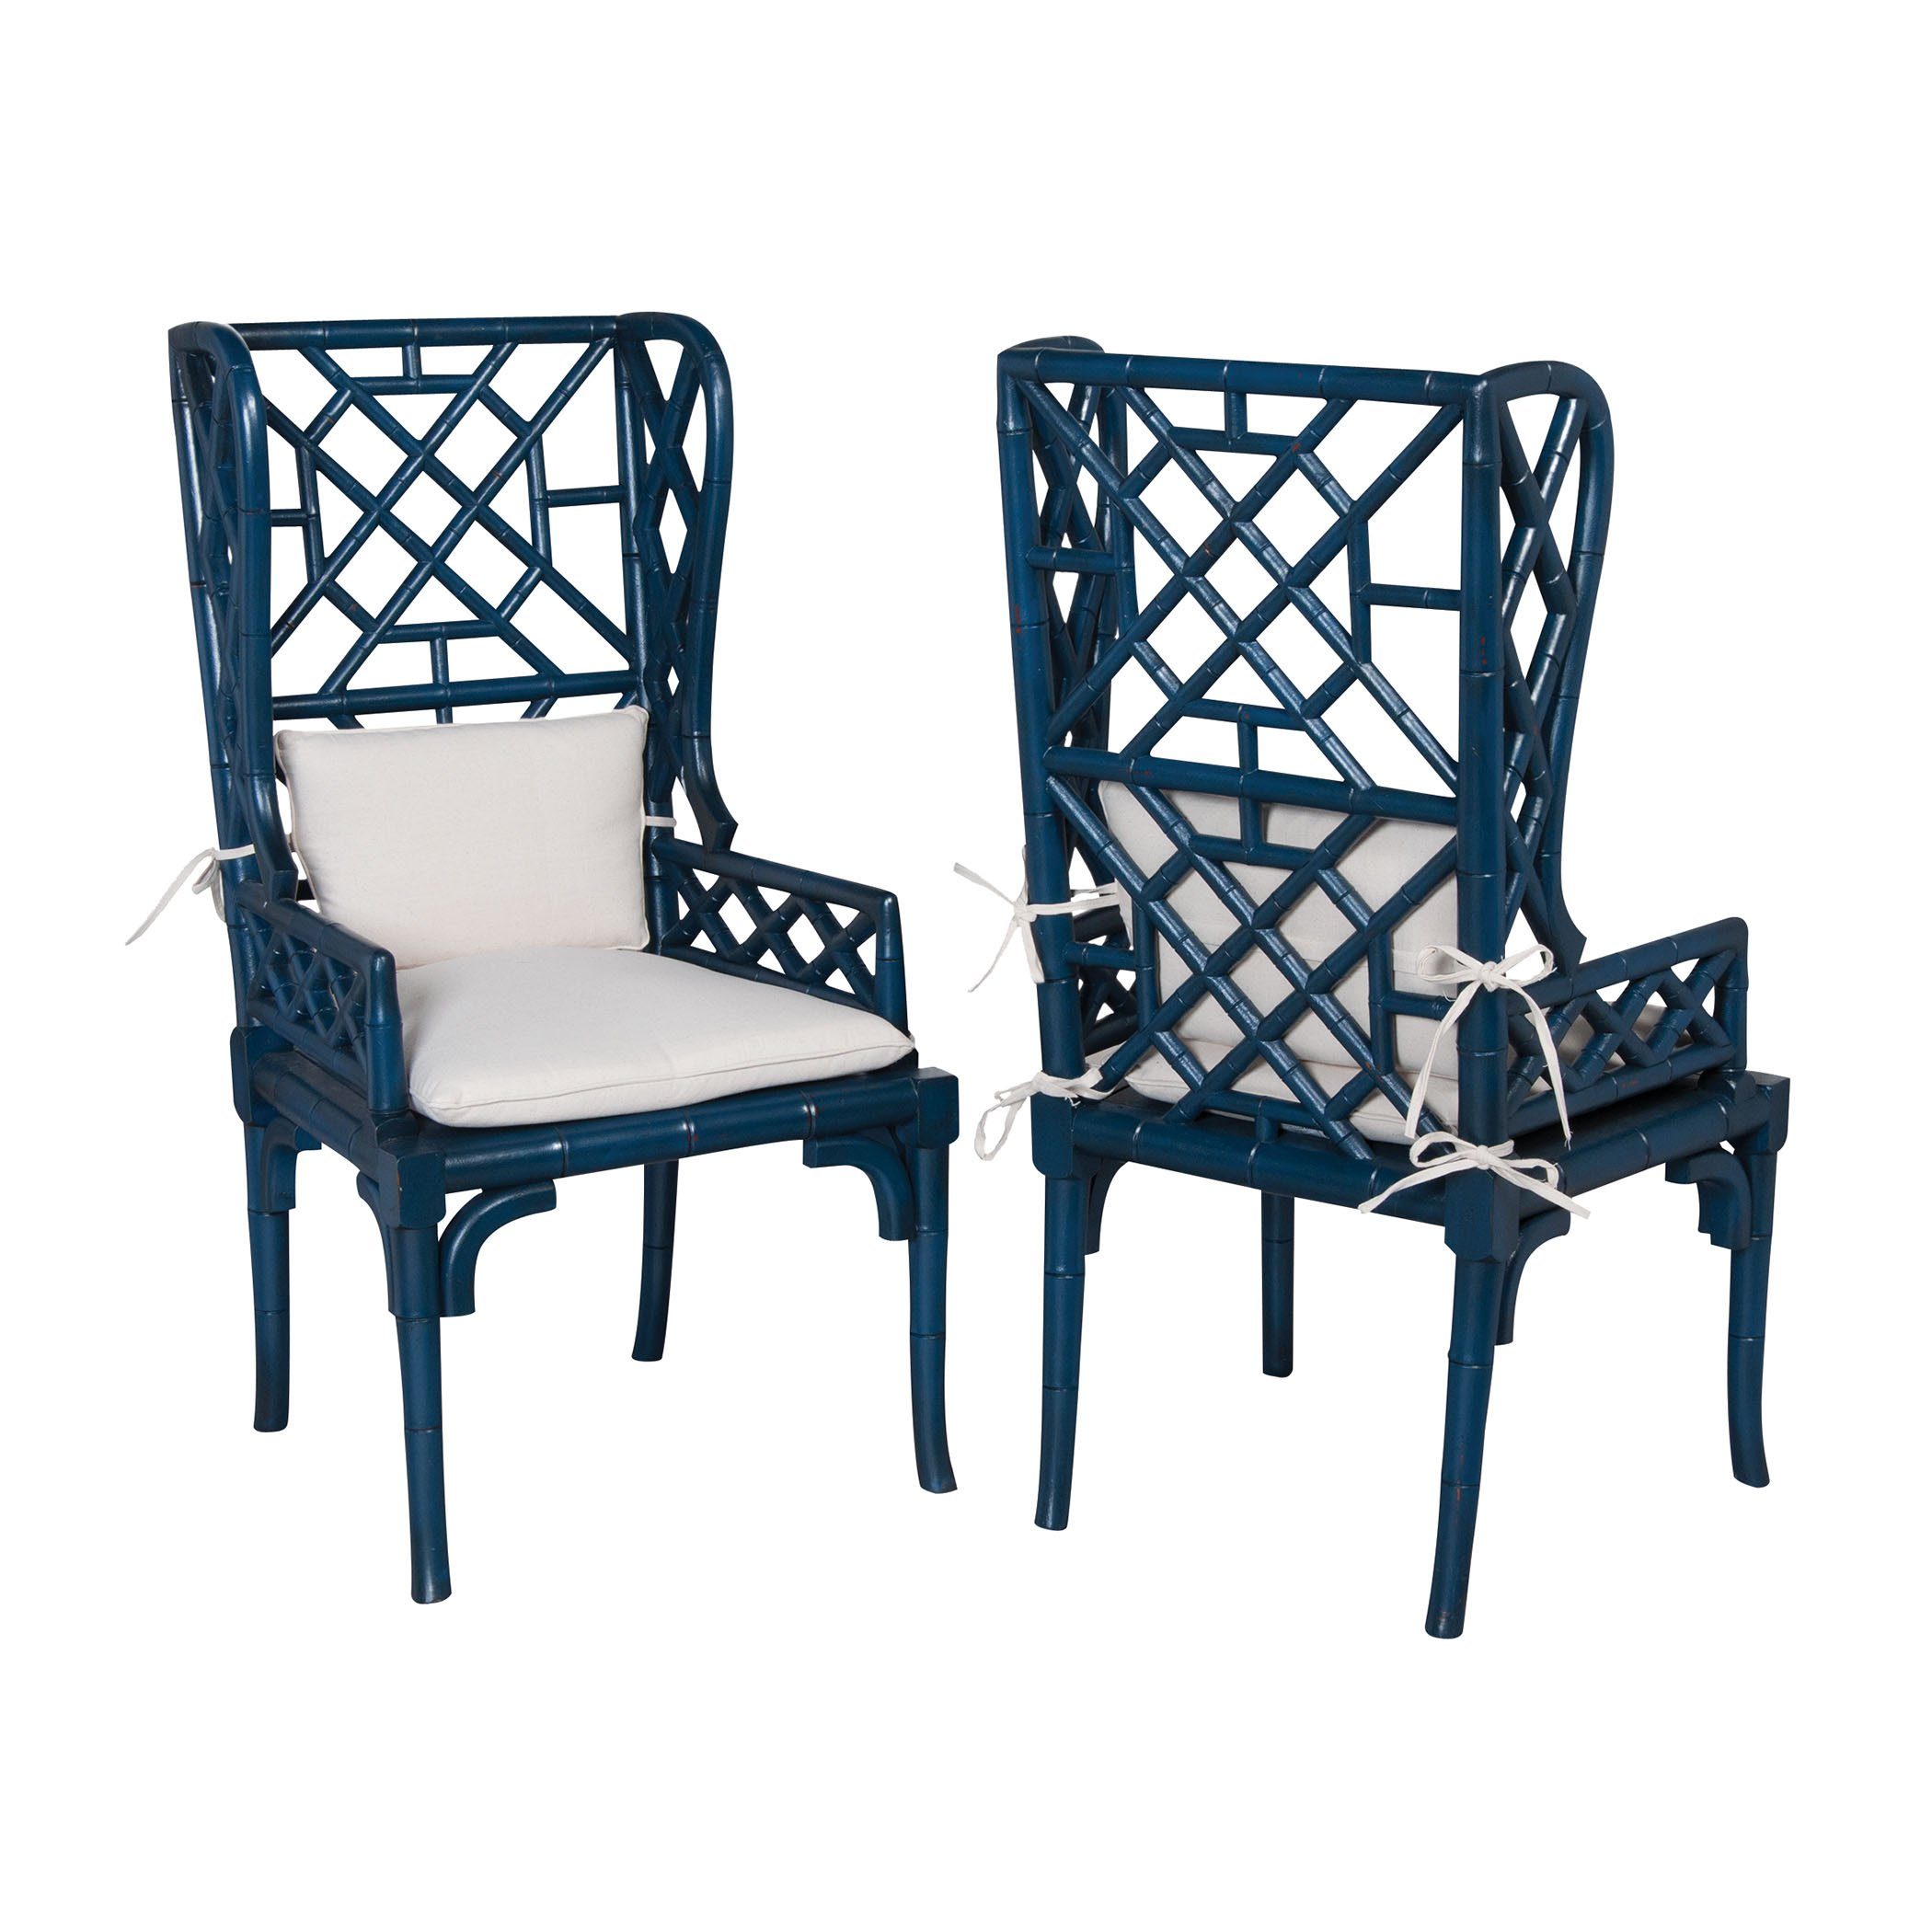 BAMBOO WING BACK CHAIR - Set of 2 Furniture GuildMaster 